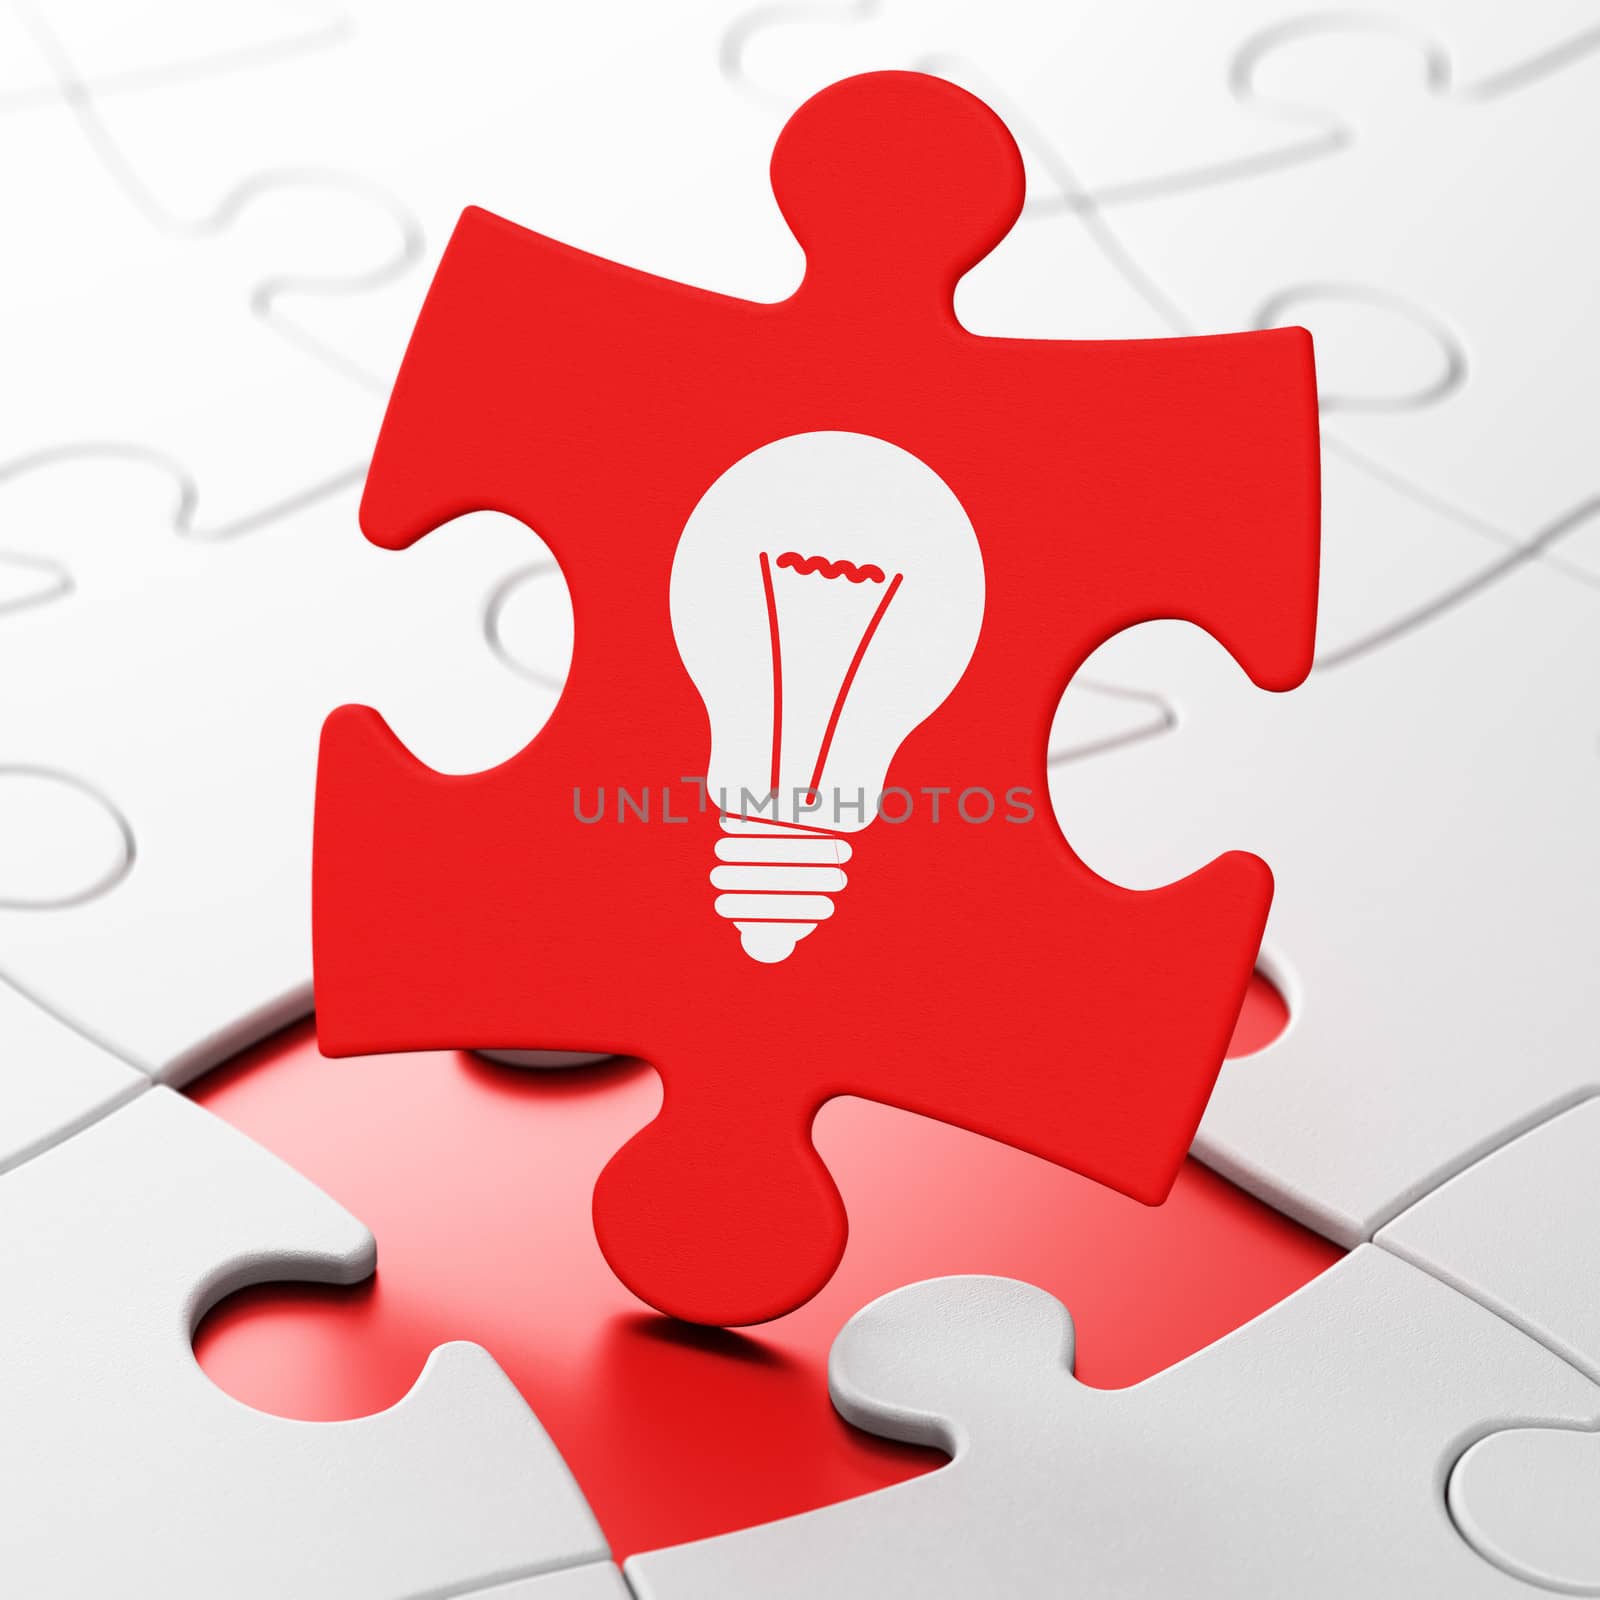 Finance concept: Light Bulb on Red puzzle pieces background, 3d render